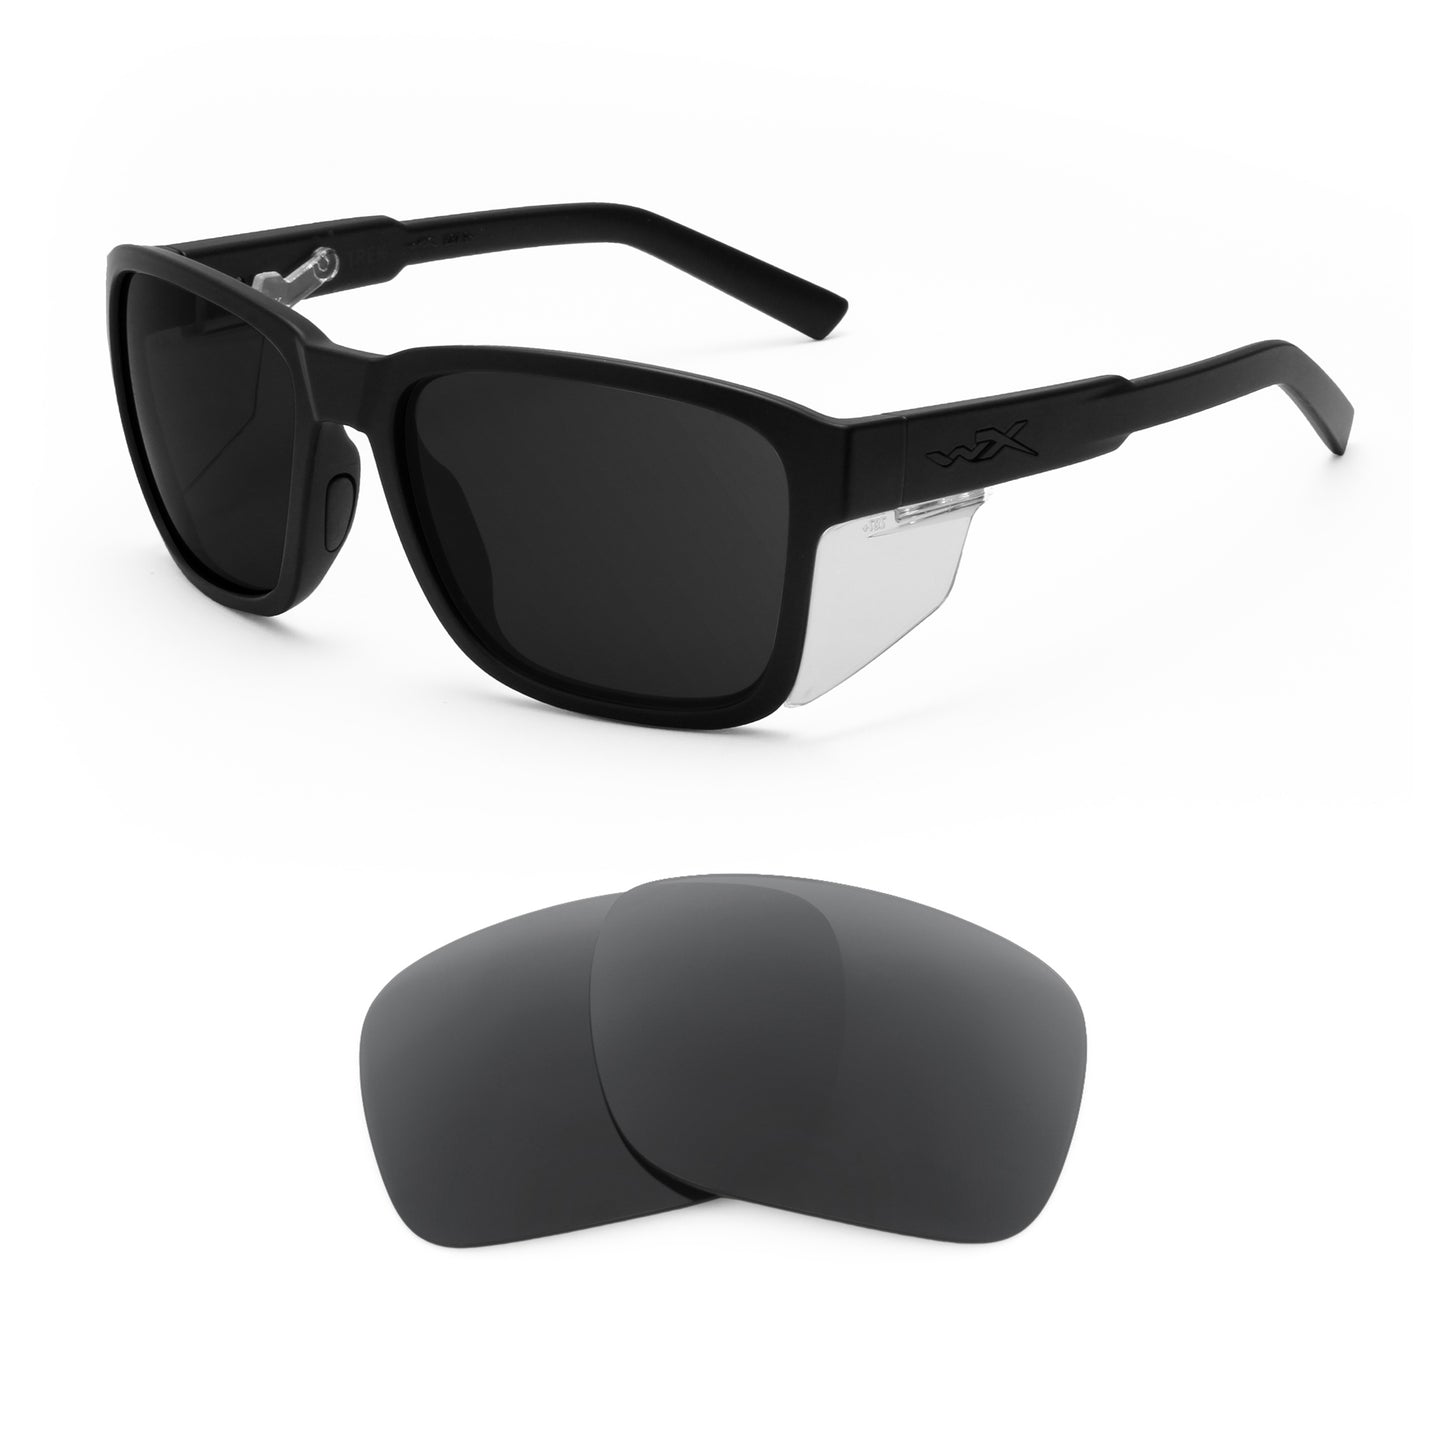 Wiley X Trek sunglasses with replacement lenses